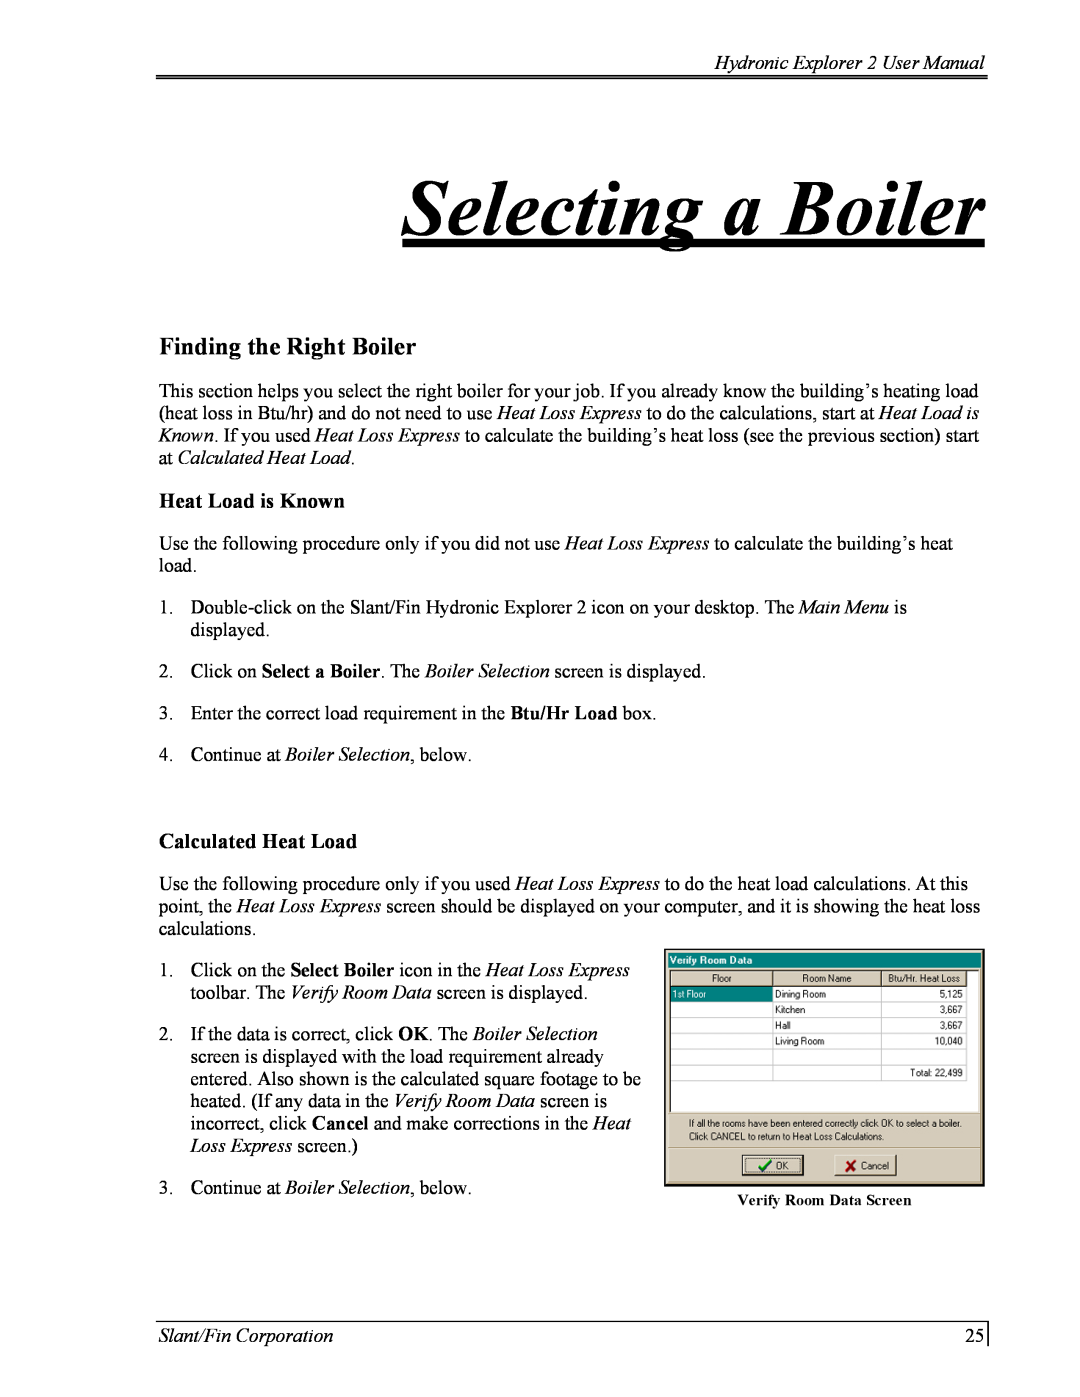 Slant/Fin Hydronic Explorer 2 Selecting a Boiler, Finding the Right Boiler, Loss Express screen, Slant/Fin Corporation 